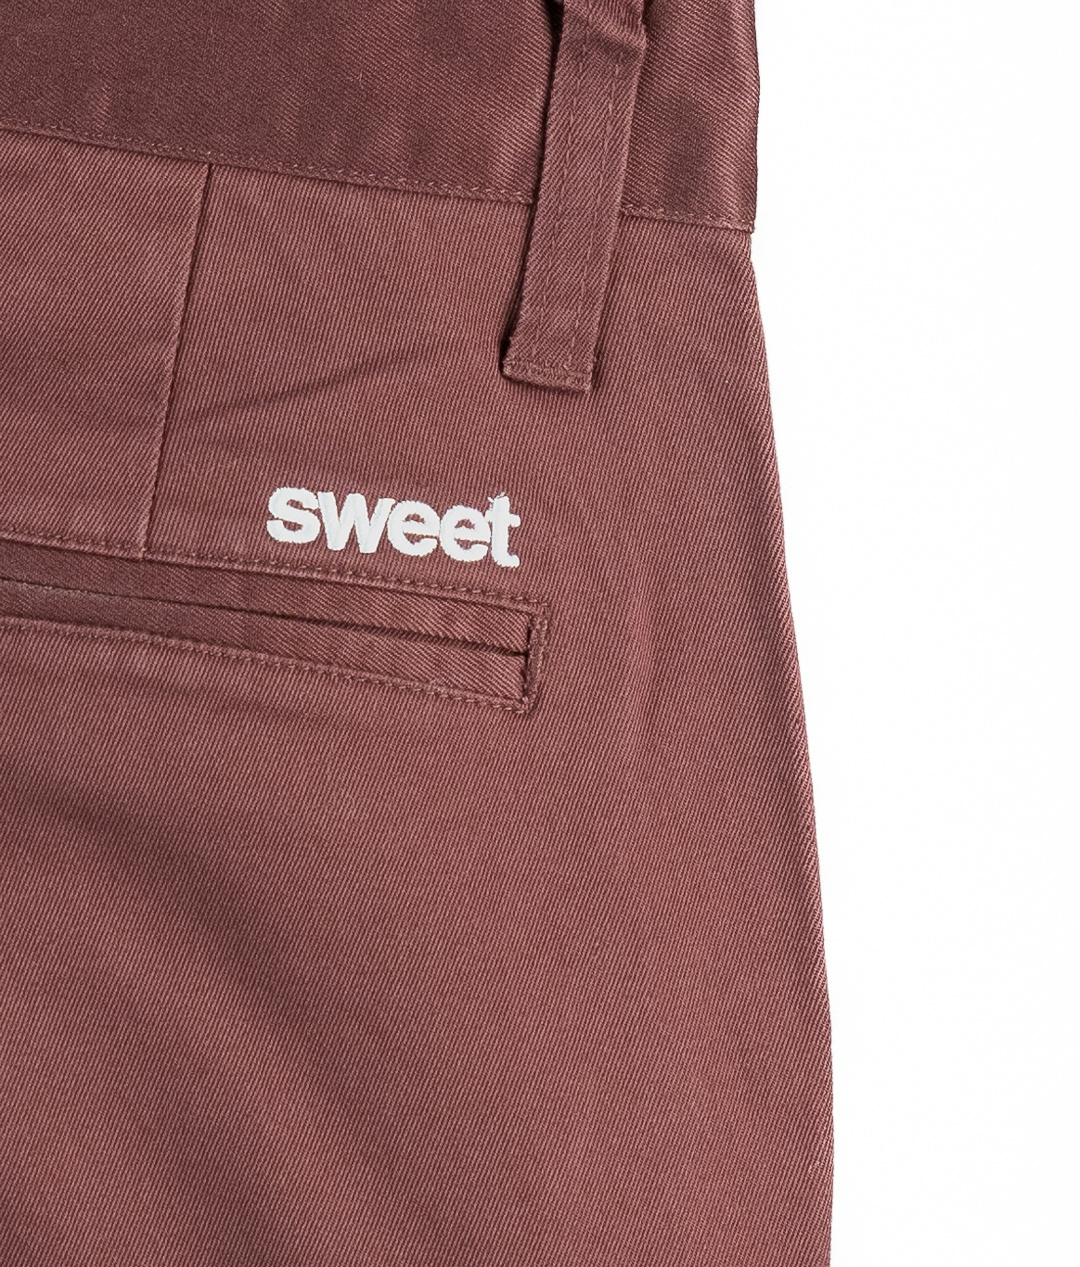 Vintage & Second Hand Sweet Sktbs - The Chino Pants Brown 2